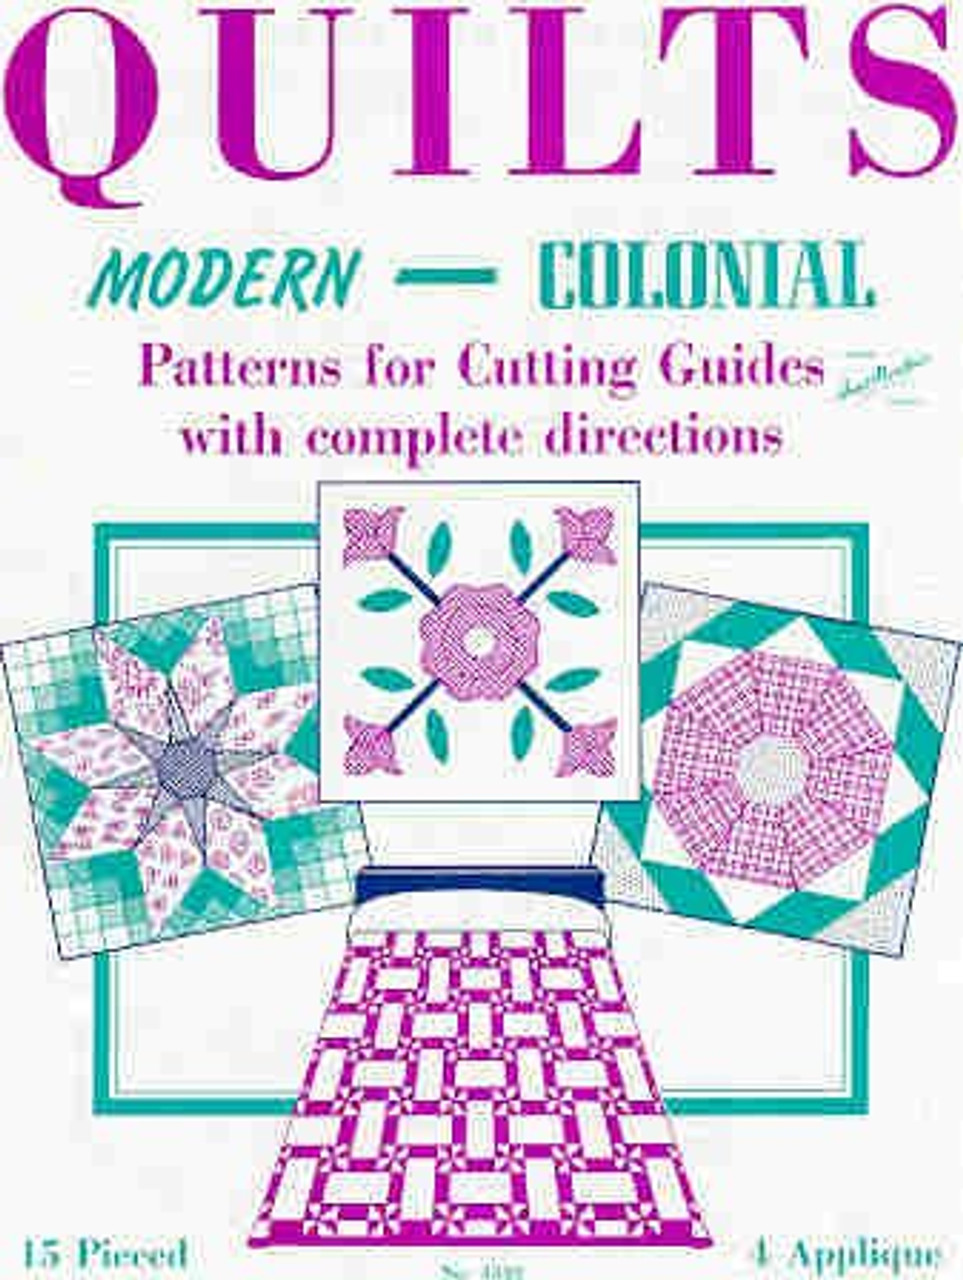 Colonial Patterns, Inc.